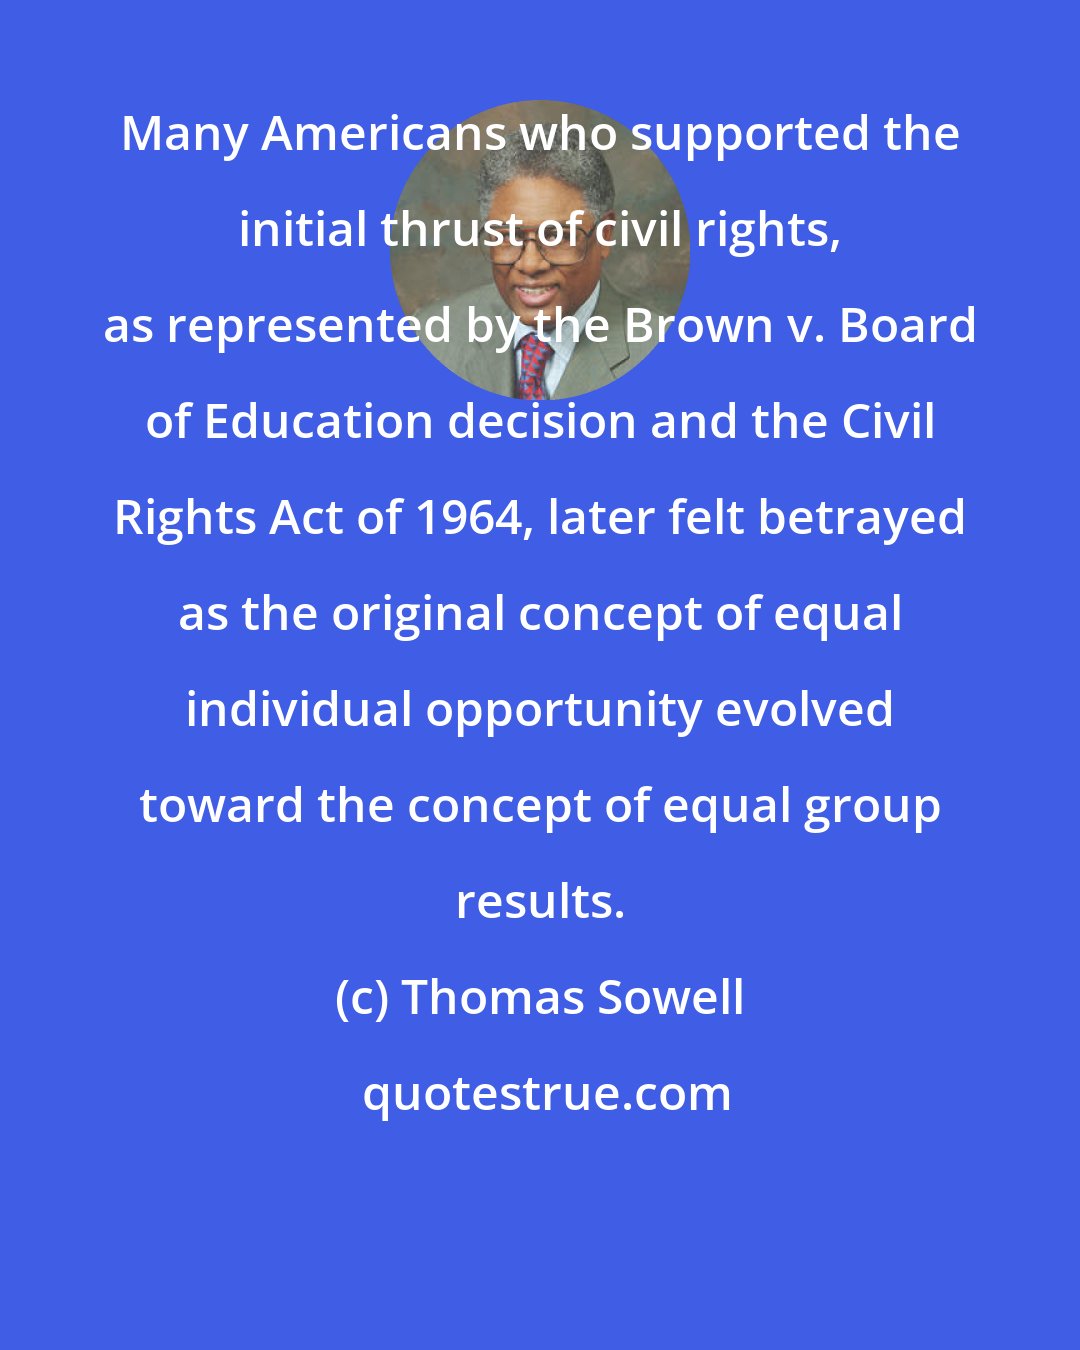 Thomas Sowell: Many Americans who supported the initial thrust of civil rights, as represented by the Brown v. Board of Education decision and the Civil Rights Act of 1964, later felt betrayed as the original concept of equal individual opportunity evolved toward the concept of equal group results.